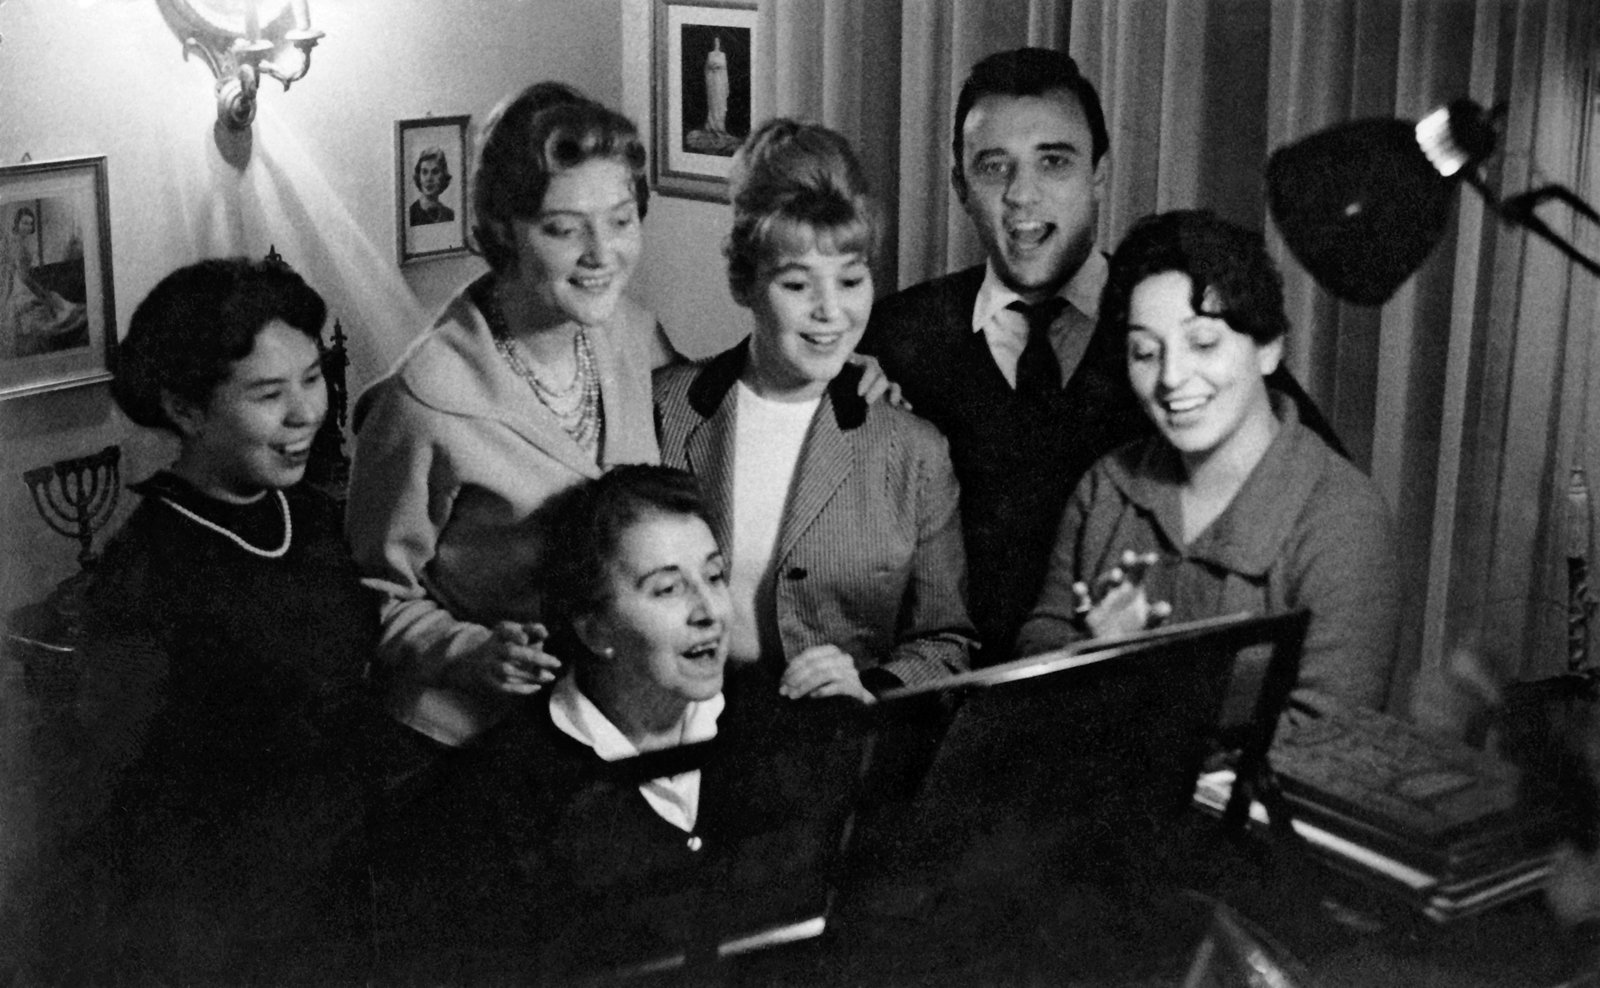 Frances McDermott with her singing class, on via Col di Lana in Rome, c. 1959.